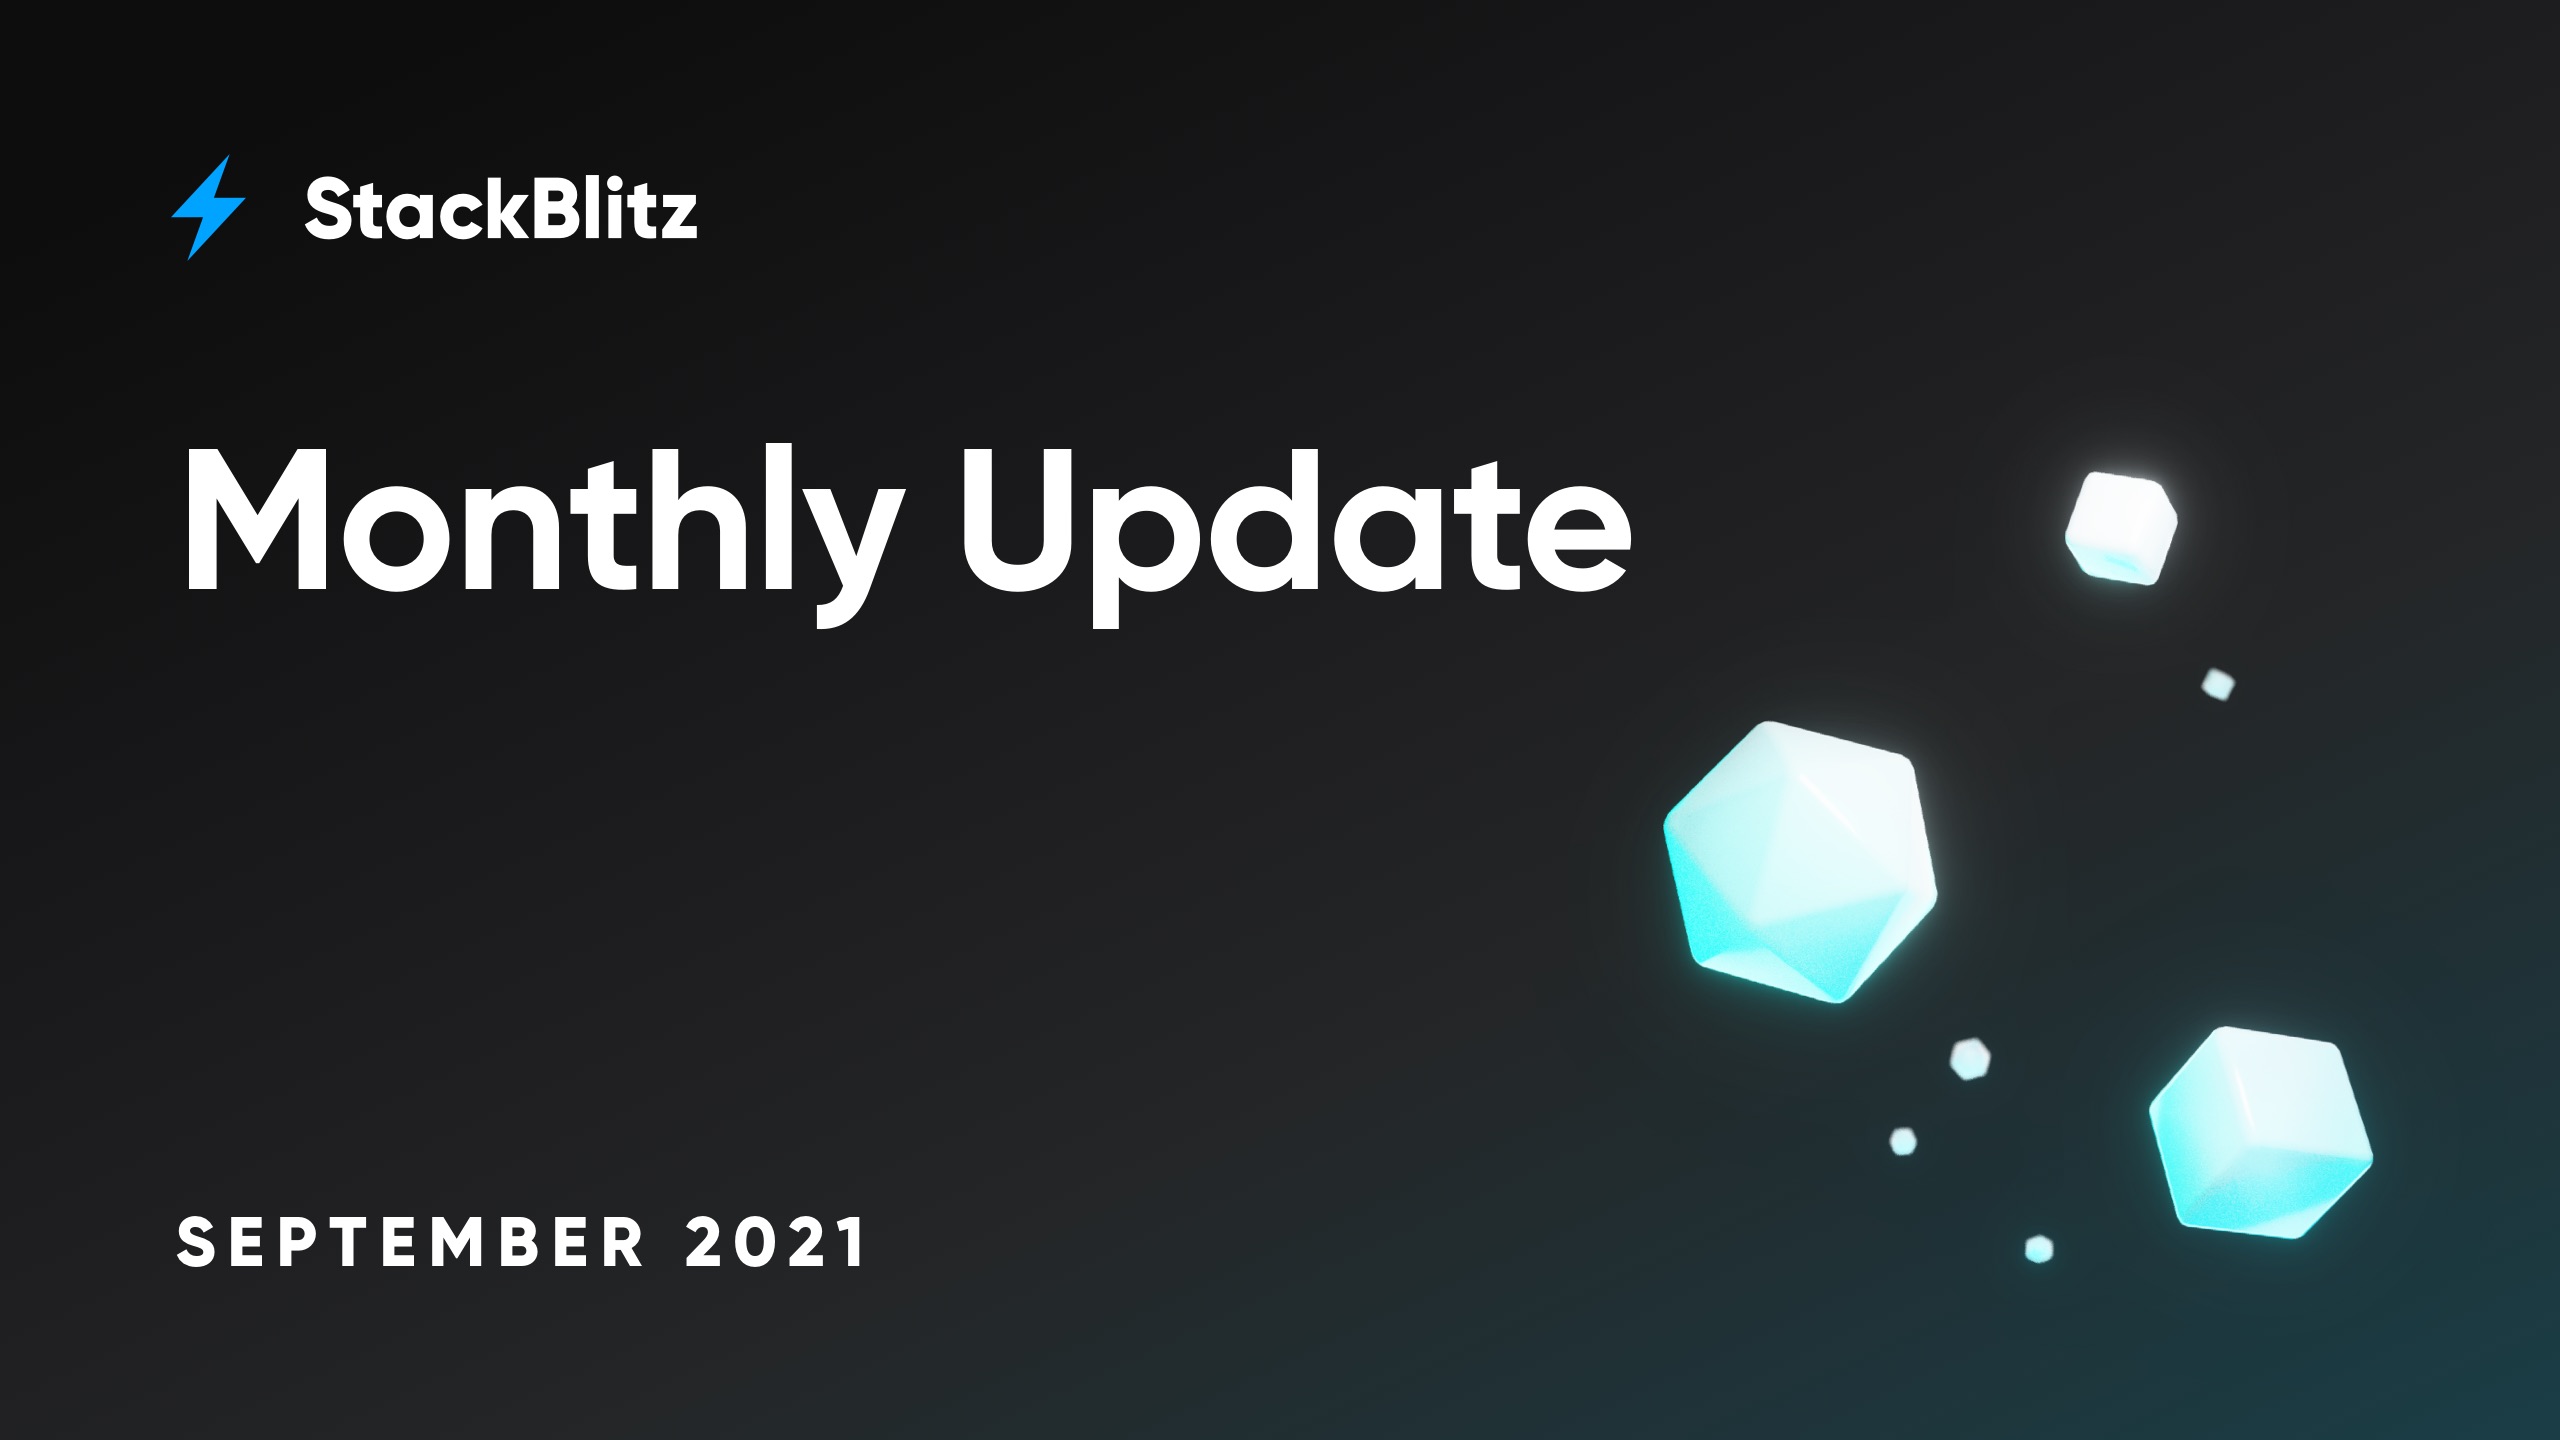 Updates to StackBlitz platform in August and September of 2021